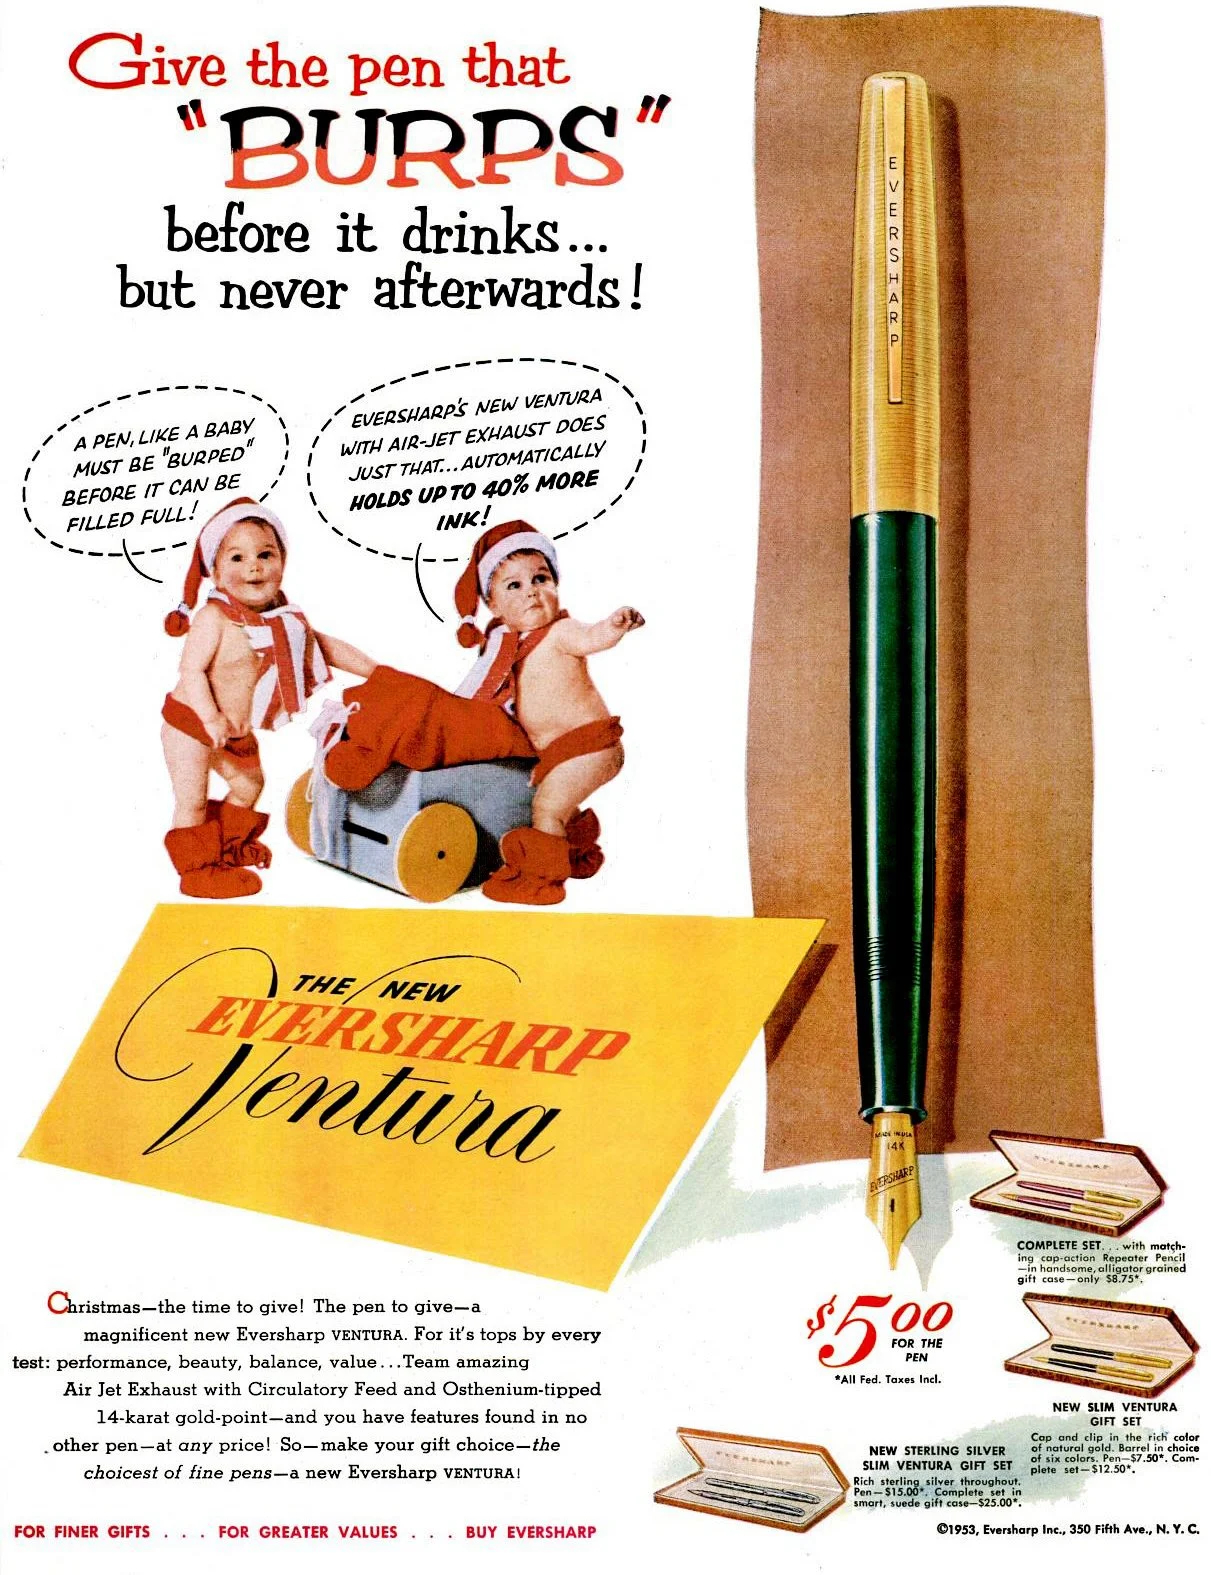 1953-Give-the-pen-that-burps.jpeg